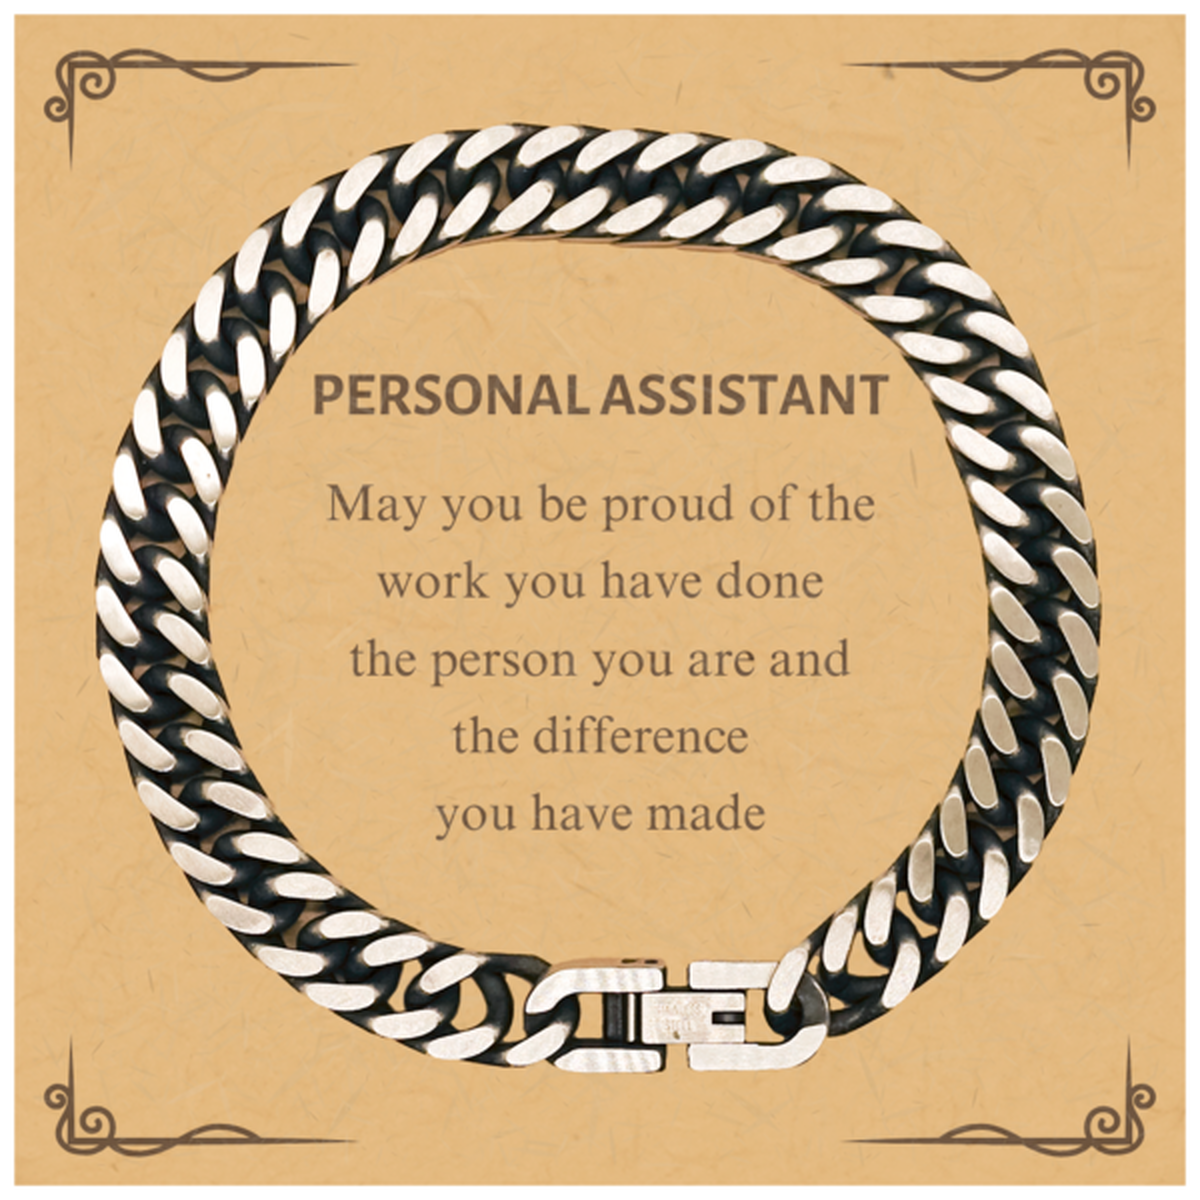 Personal Assistant May you be proud of the work you have done, Retirement Personal Assistant Cuban Link Chain Bracelet for Colleague Appreciation Gifts Amazing for Personal Assistant